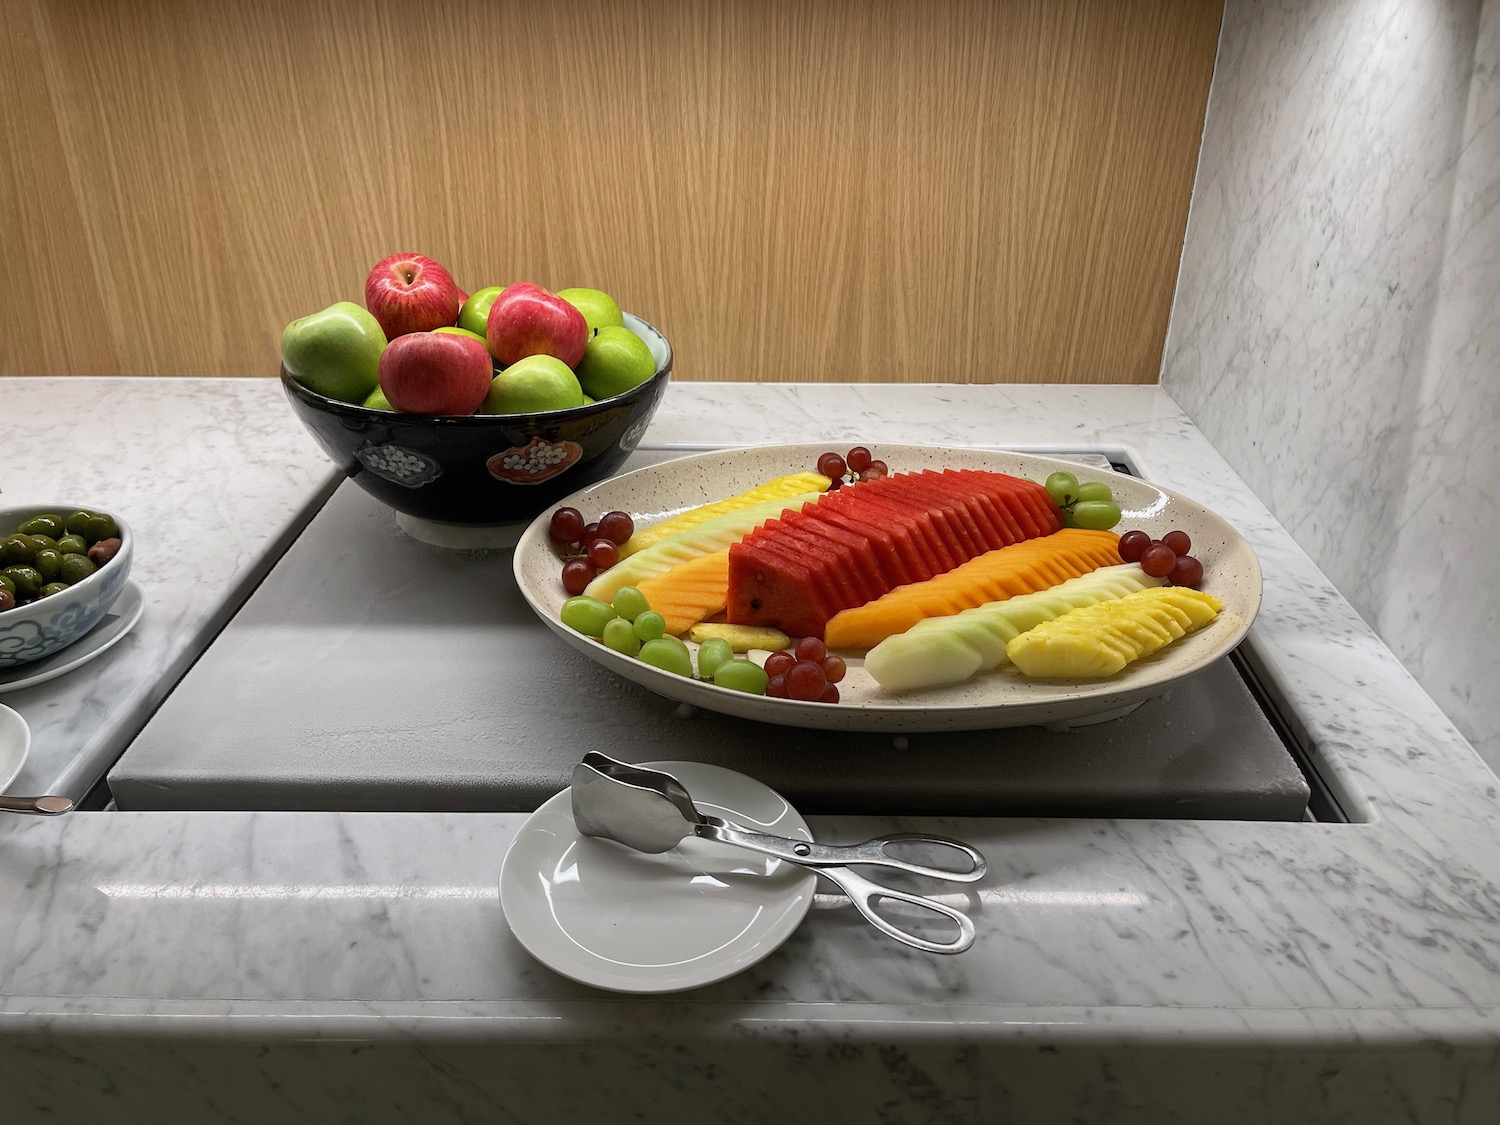 a plate of fruit and a bowl of apples